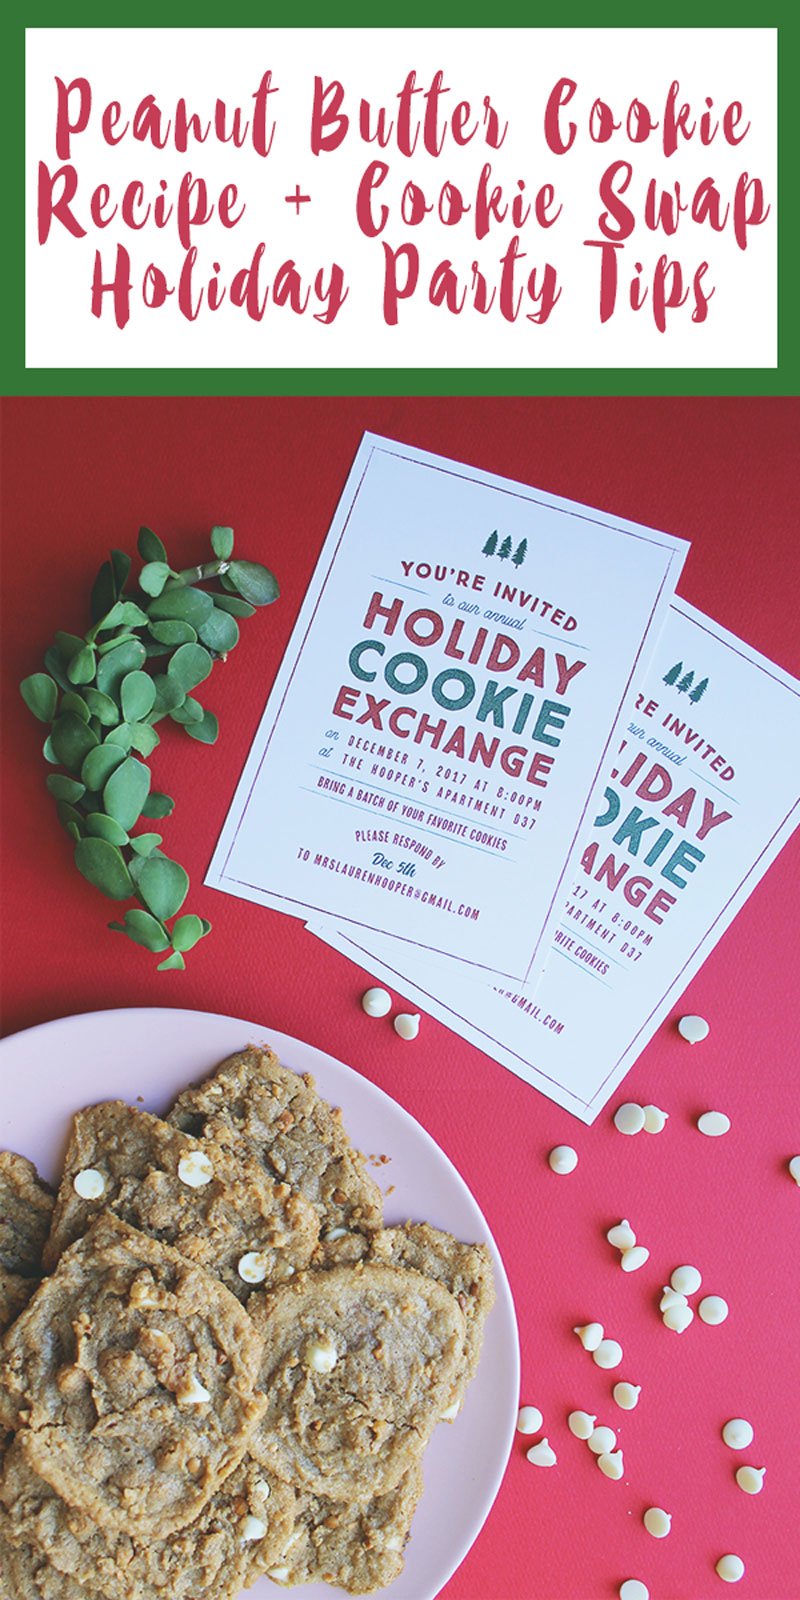 Click through for simple, party winning Peanut Butter + Chocolate Chip Cookie recipes. Plus! Holiday party tips and invitations. 